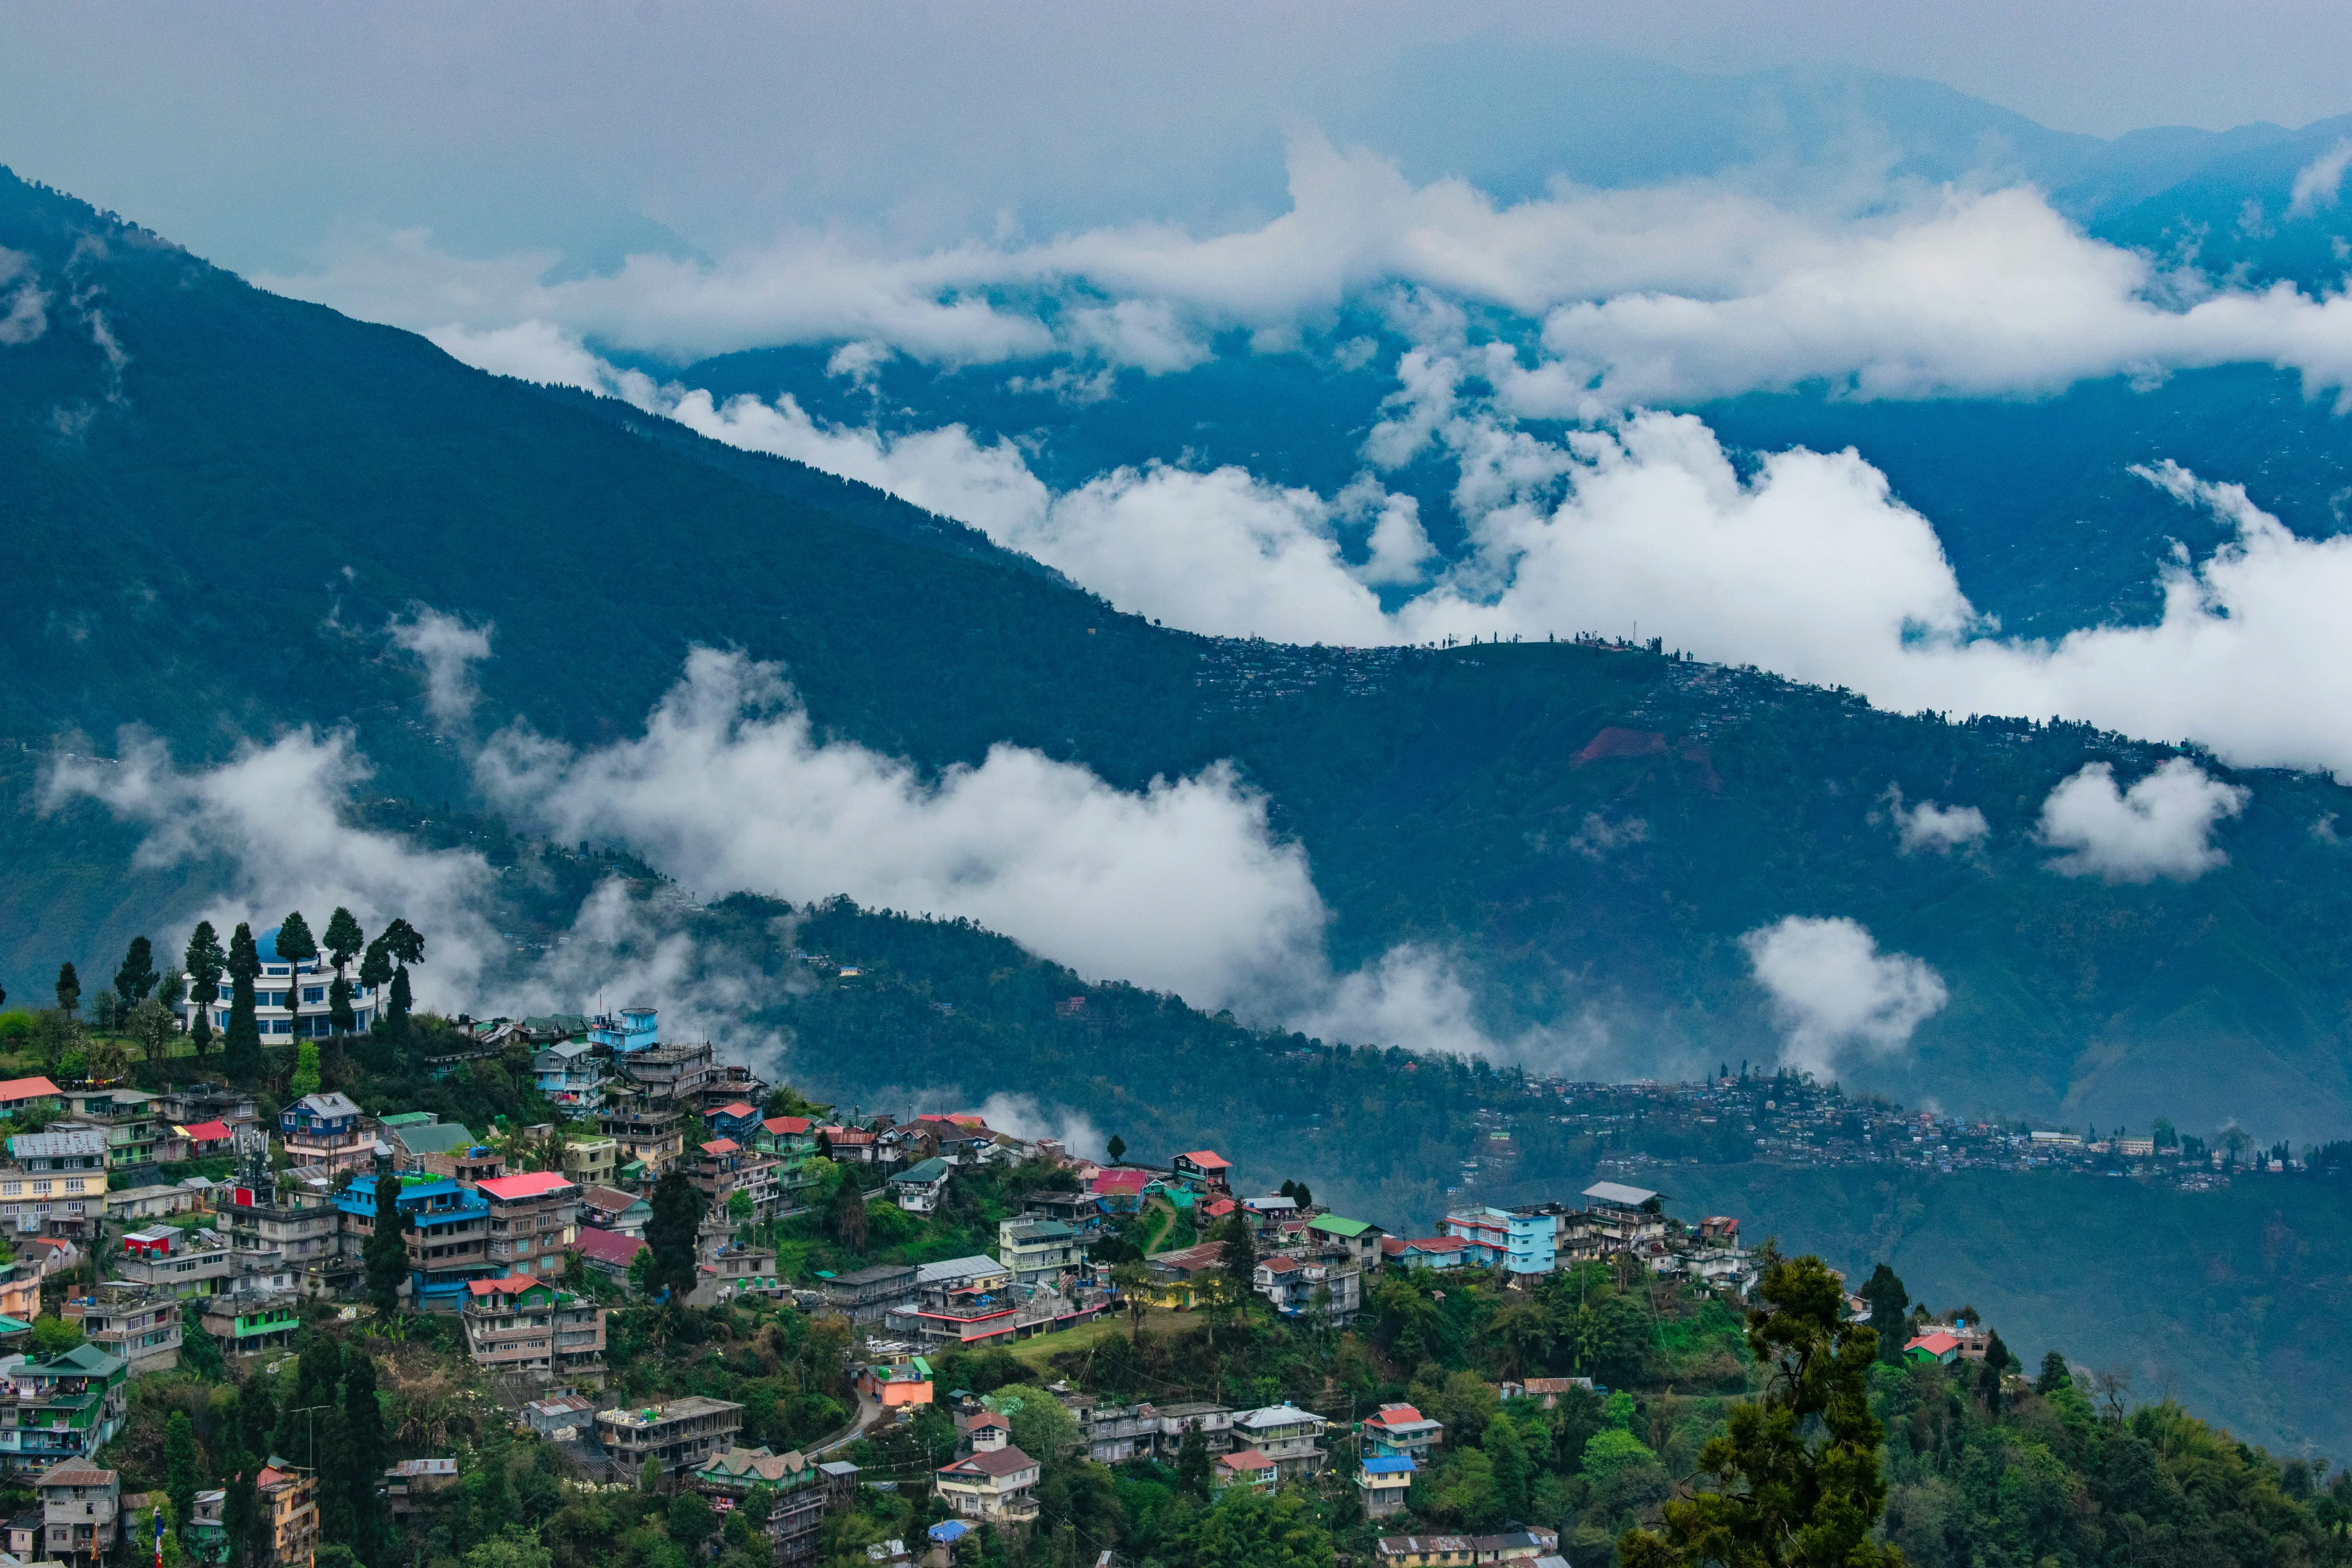 Dazzeling Darjeeling Smart Fmaily Vacations